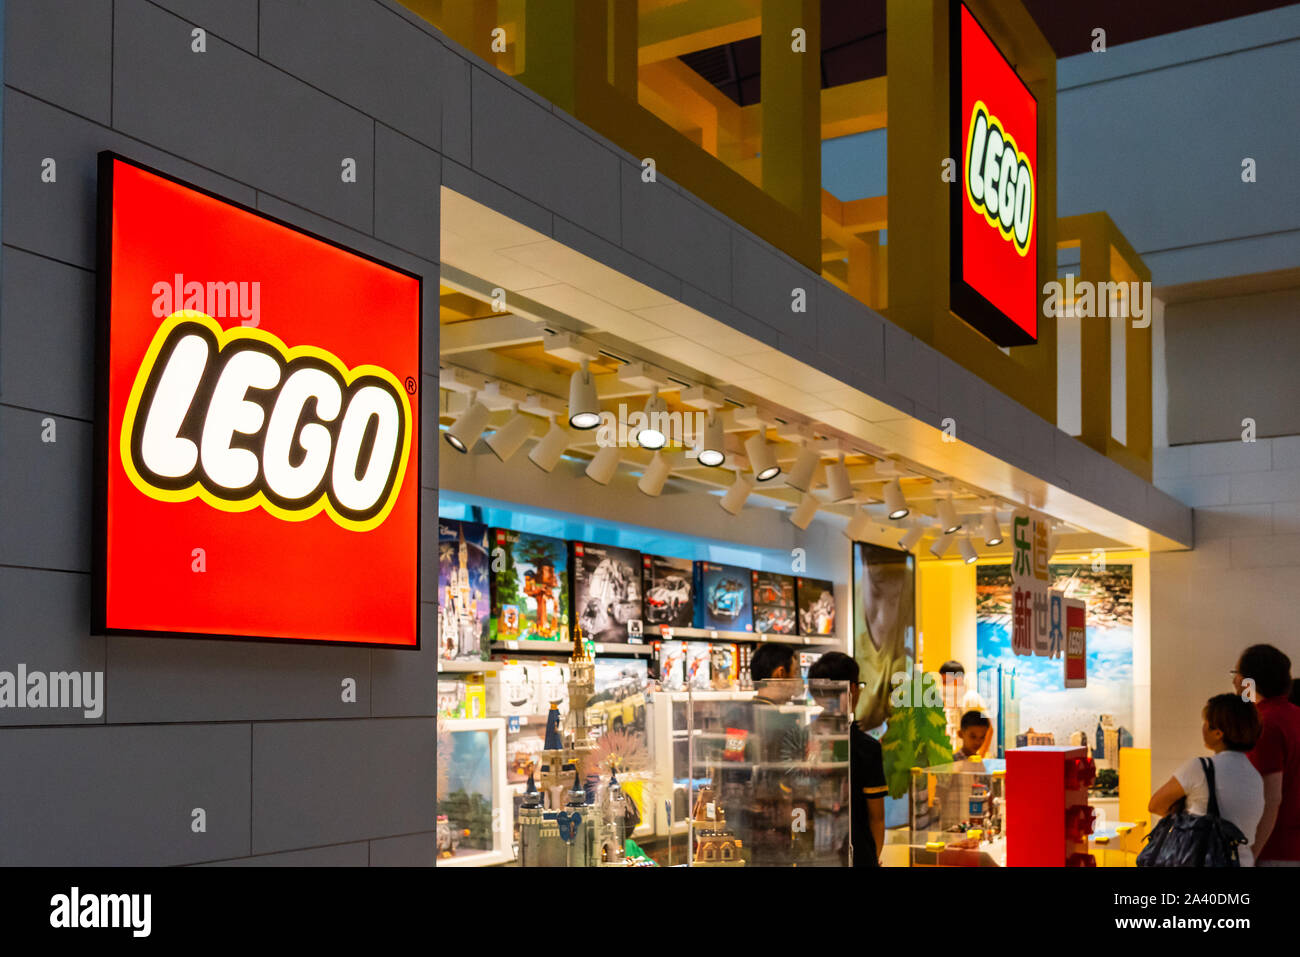 Lego Brand High Resolution Stock Photography and Images - Alamy